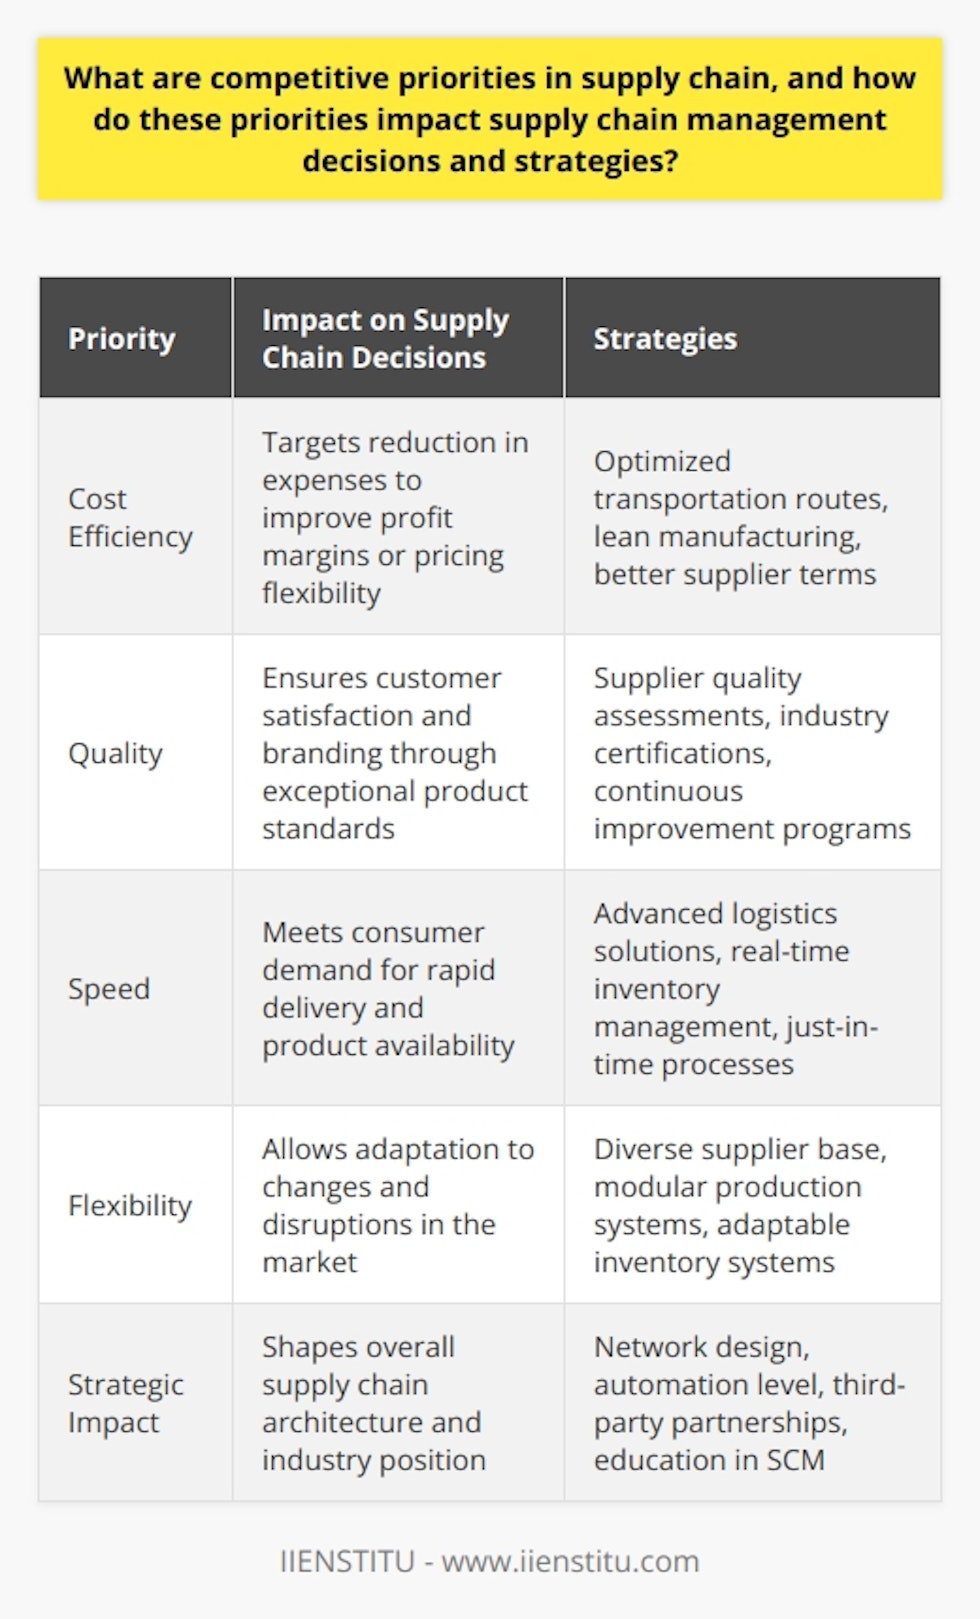 Competitive priorities in supply chain management refer to specific areas that companies focus on to gain a competitive edge in the market. These priorities typically revolve around cost, quality, speed, and flexibility. Each of these areas impacts the decisions and strategies that drive supply chain management, and a nuanced understanding of their roles can position a company for success.Cost Efficiency: A Keystone PriorityCost efficiency remains a cornerstone of competitive strategies in supply chain management. Achieving a lower cost base without sacrificing quality can secure higher profit margins or provide space for competitive pricing strategies. Supply chain decisions driven by cost efficiency may include optimizing routes for transportation, implementing lean manufacturing techniques to reduce waste, or negotiating more favorable terms with suppliers.Quality: The Non-Negotiable PriorityMaintaining high-quality standards is non-negotiable for long-term success. Emphasizing quality within the supply chain ensures that end products meet or exceed customer expectations, fostering brand loyalty and avoiding costly returns or recalls. Strategies influenced by quality priorities often include rigorous supplier assessments, adoption of industry certifications, and continuous improvement programs.Speed: The Response to Consumer DemandIn an era where consumers expect rapid delivery times, speed has become a competitive priority that can differentiate a company from its rivals. Decisions that prioritize speed in the supply chain could involve investing in advanced logistics solutions, optimizing inventory management with real-time data, or adopting just-in-time manufacturing processes to minimize lead times.Flexibility: Adaptation as a PrioritySupply chains must be agile to respond to market volatility or unexpected disruptions. Flexibility as a competitive priority can demand investment in a diverse supplier base to prevent bottlenecks, implementing modular production systems that can quickly be reconfigured, or designing inventory systems that can handle a variety of products.Strategic Impact of Competitive PrioritiesAdopting competitive priorities in supply chain management entails tailoring strategies to support specific goals. Decisions based on these priorities can dictate the supply chain network's design, automation level, third-party partnerships, and even the company's place within the broader industry ecosystem. Competitive priorities are significant as they can reinforce a company's unique selling proposition (USP) and cement its market position.For organizations prioritizing these competitive dimensions, training and continuous learning become pivotal in staying ahead. Resources like IIENSTITU offer courses and expertise in areas such as supply chain management, facilitating the development of skills and strategies aligned with competitive priorities. Strategic advancements in supply chain management require not only the analysis of current capabilities but also the prognosis of future trends and demands, making education and strategic foresight invaluable tools for organizational success.